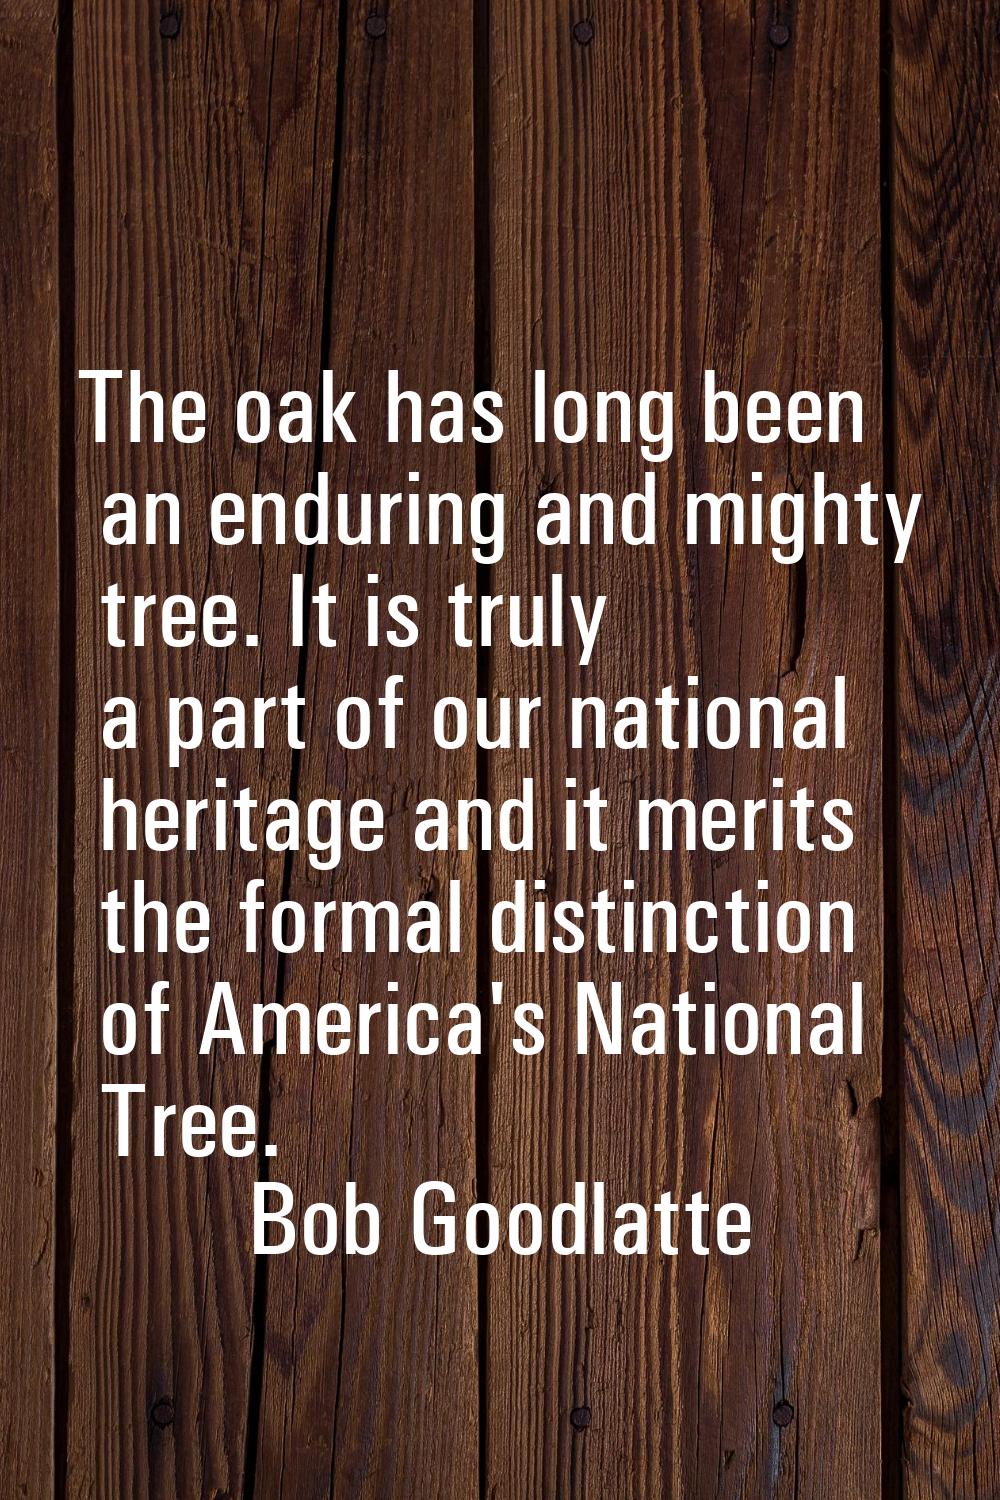 The oak has long been an enduring and mighty tree. It is truly a part of our national heritage and 